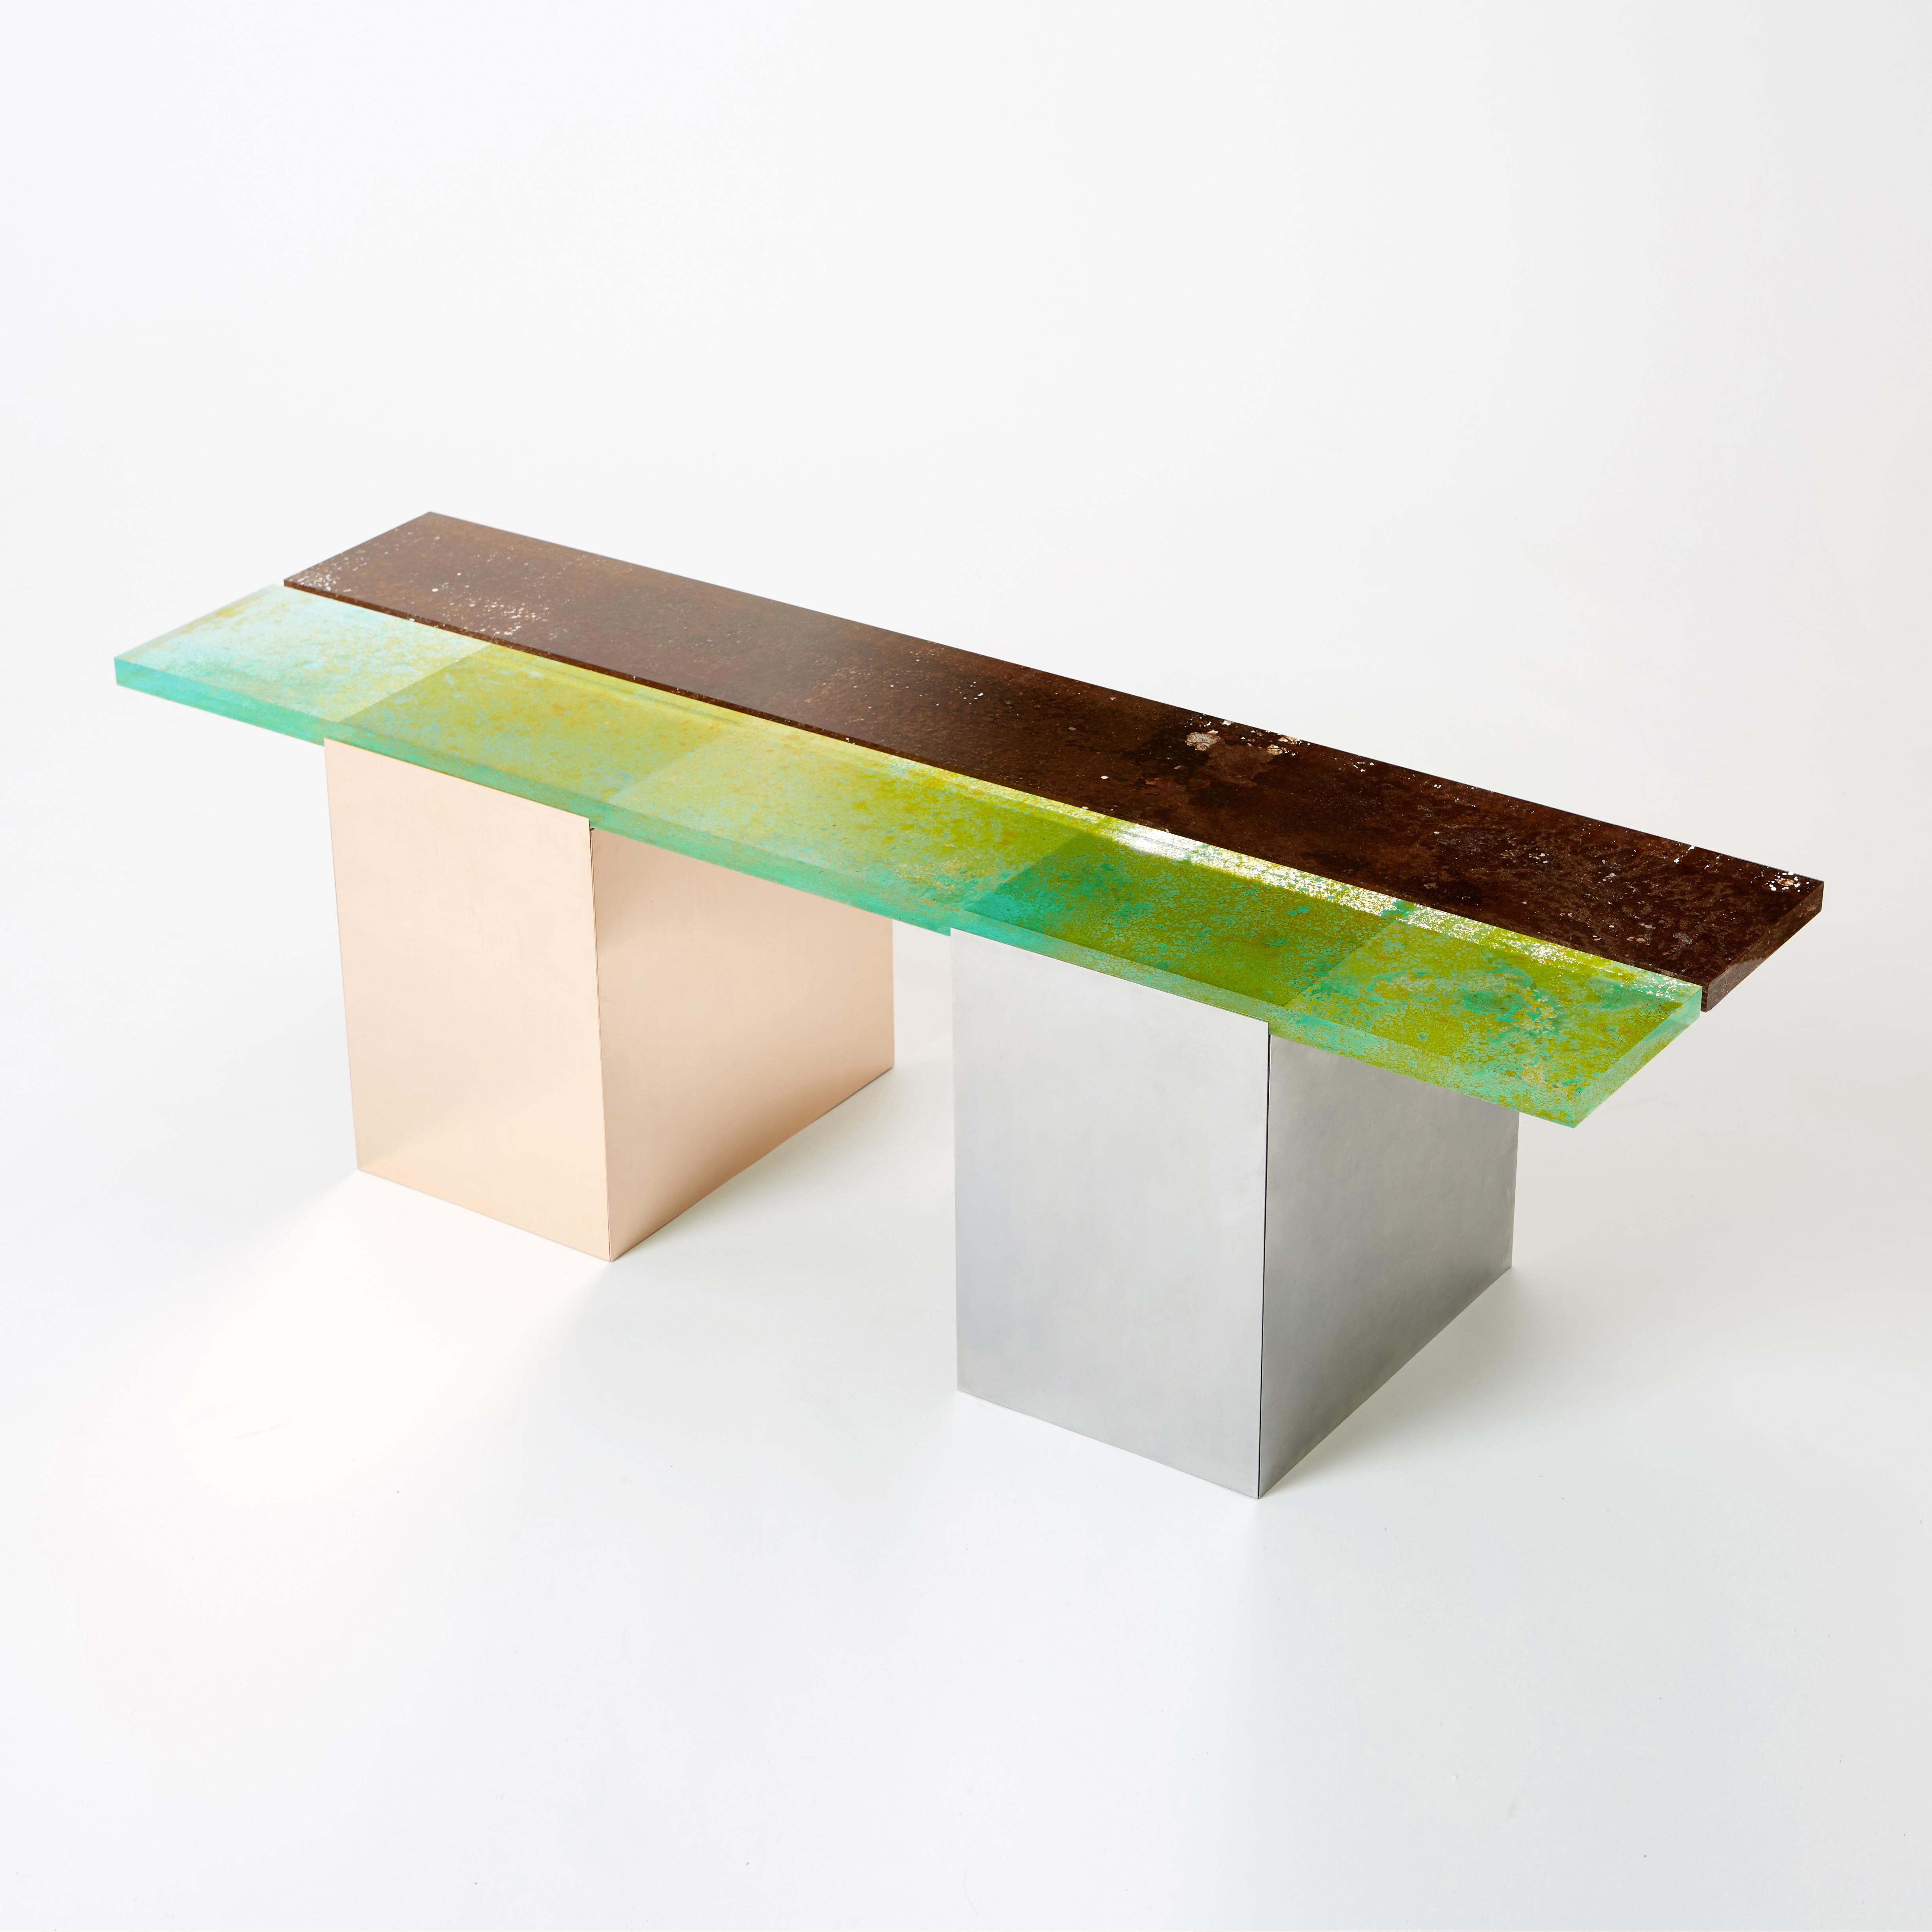 Bench designed by Yuma Kano.
Brown and yellow green colored materials are acrylic. This acrylic is what rust was transformed. Artist calls it 